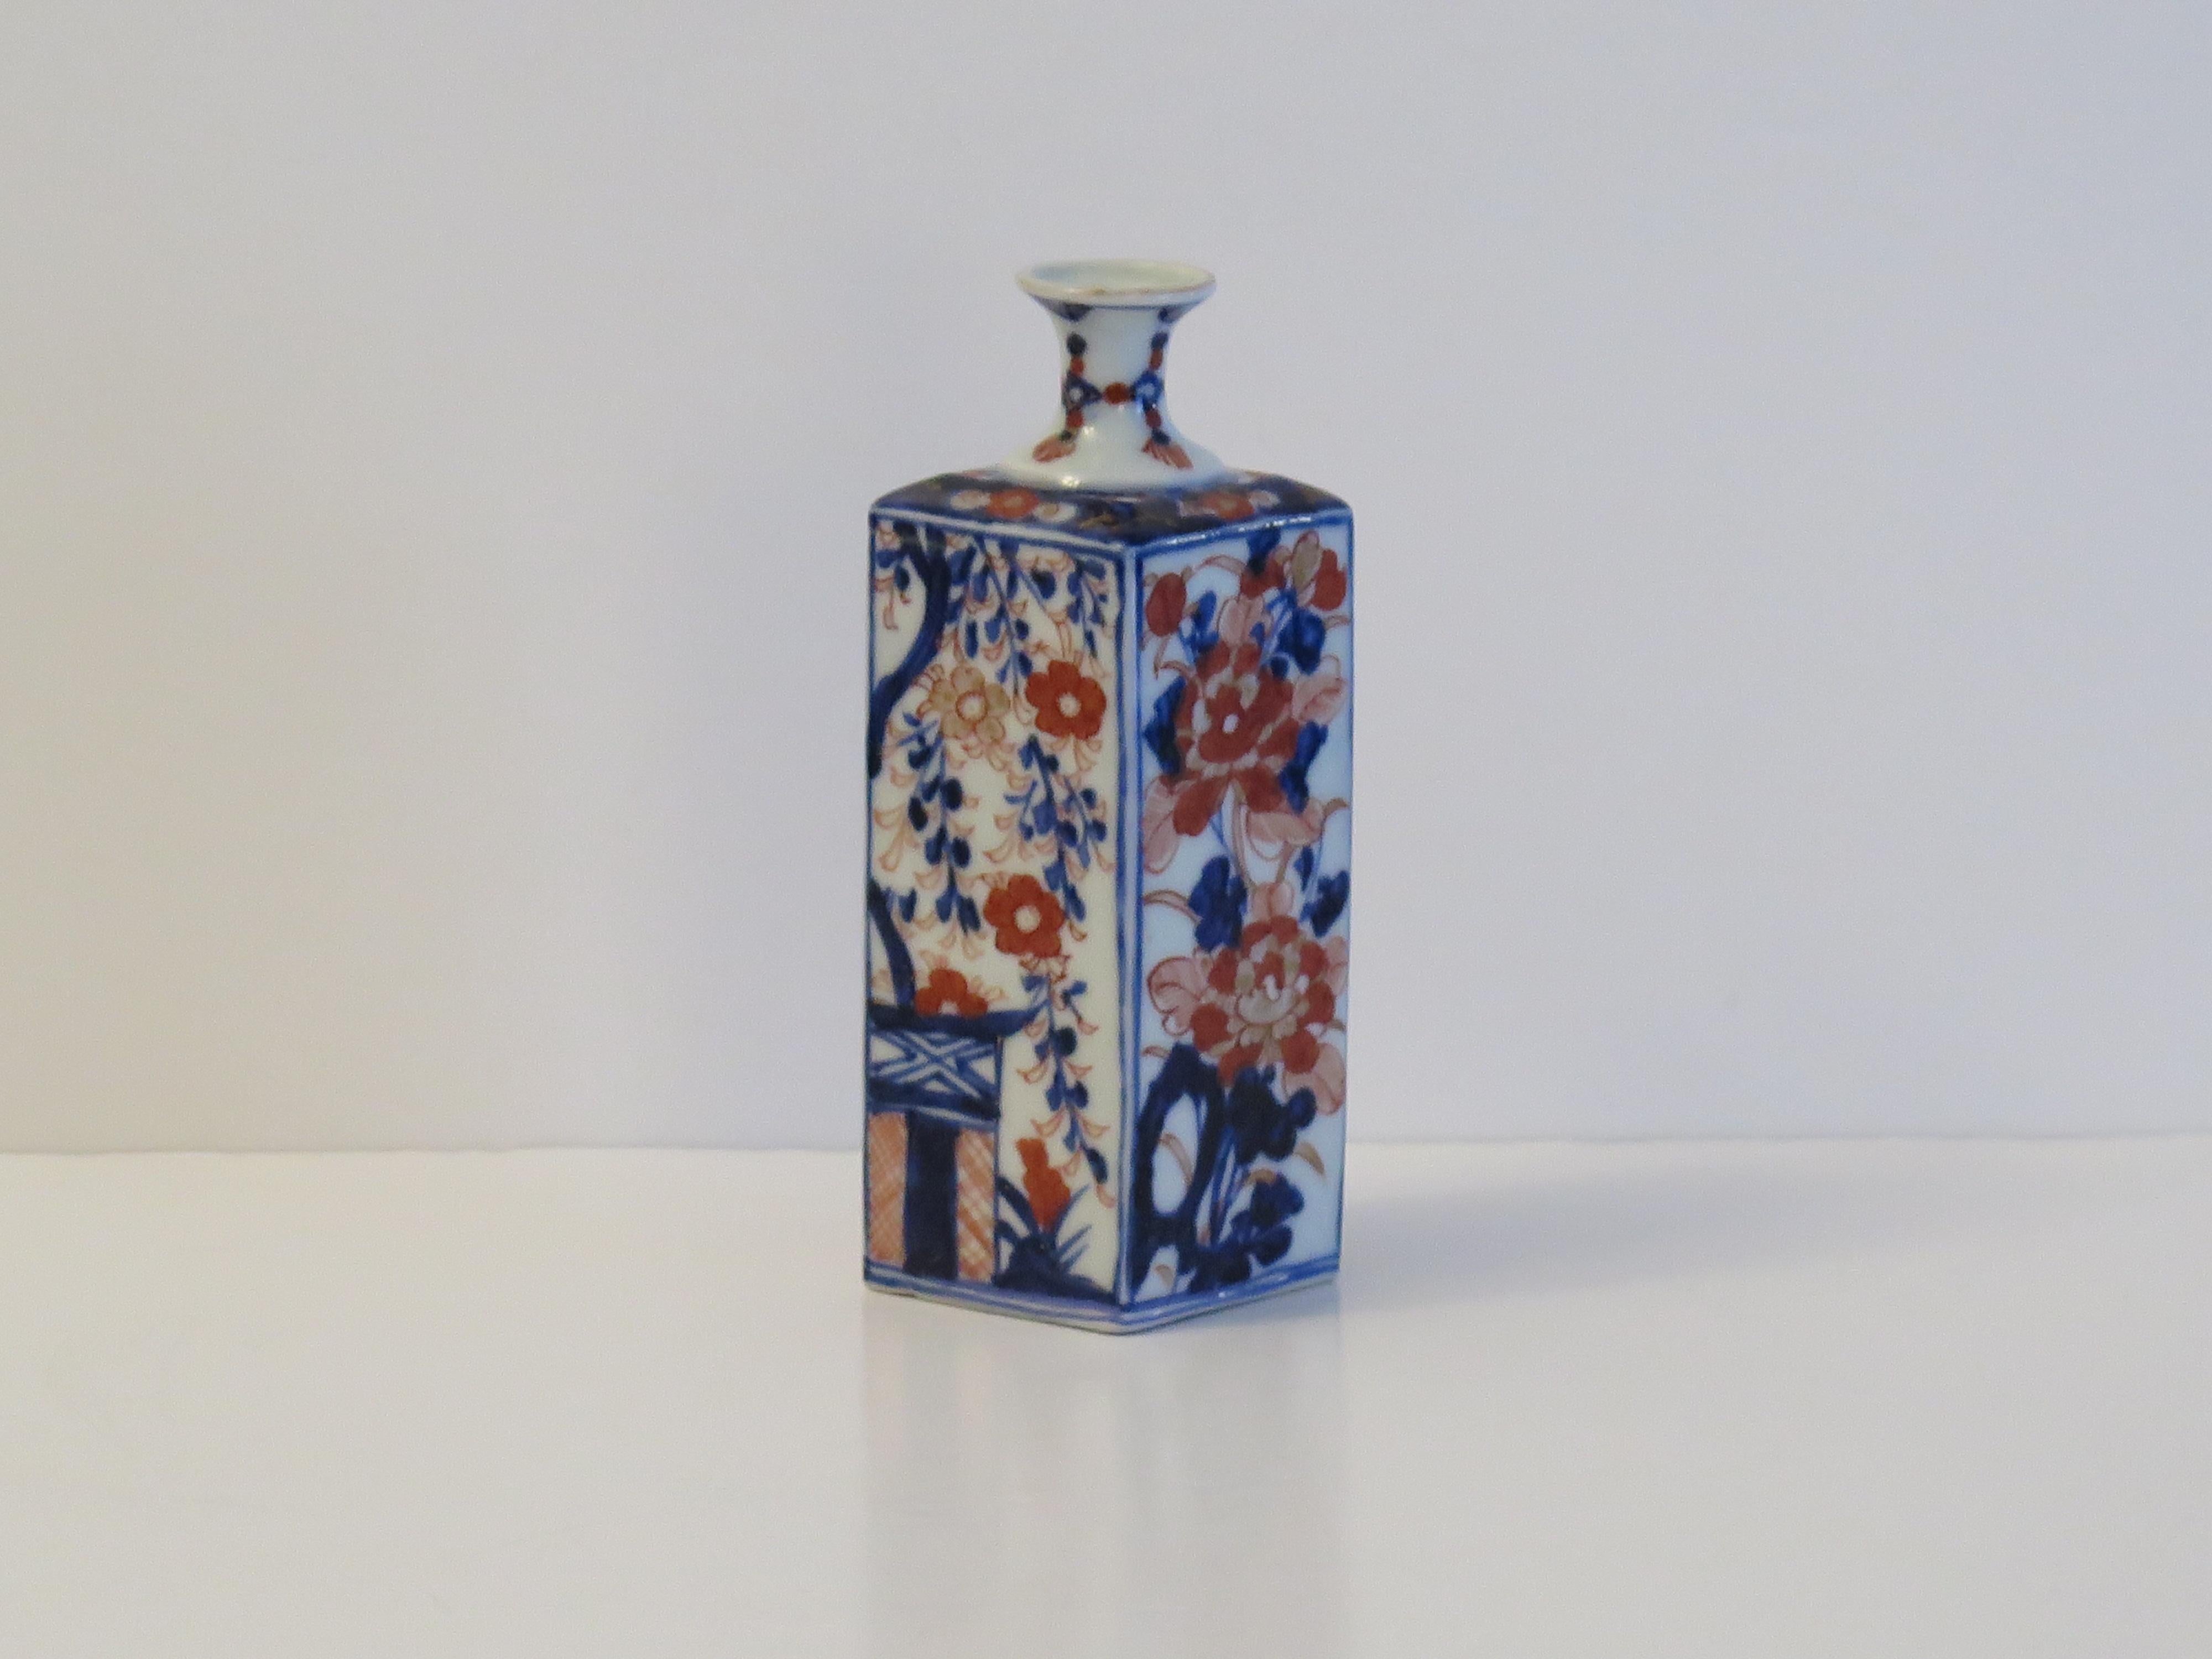 This is a beautiful Chinese Export porcelain Bottle Vase with good Imari hand painted decoration, which we date to the first half of the 18th century, circa 1740 or possibly earlier. 

This piece was probably made for the Japanese market

The vase